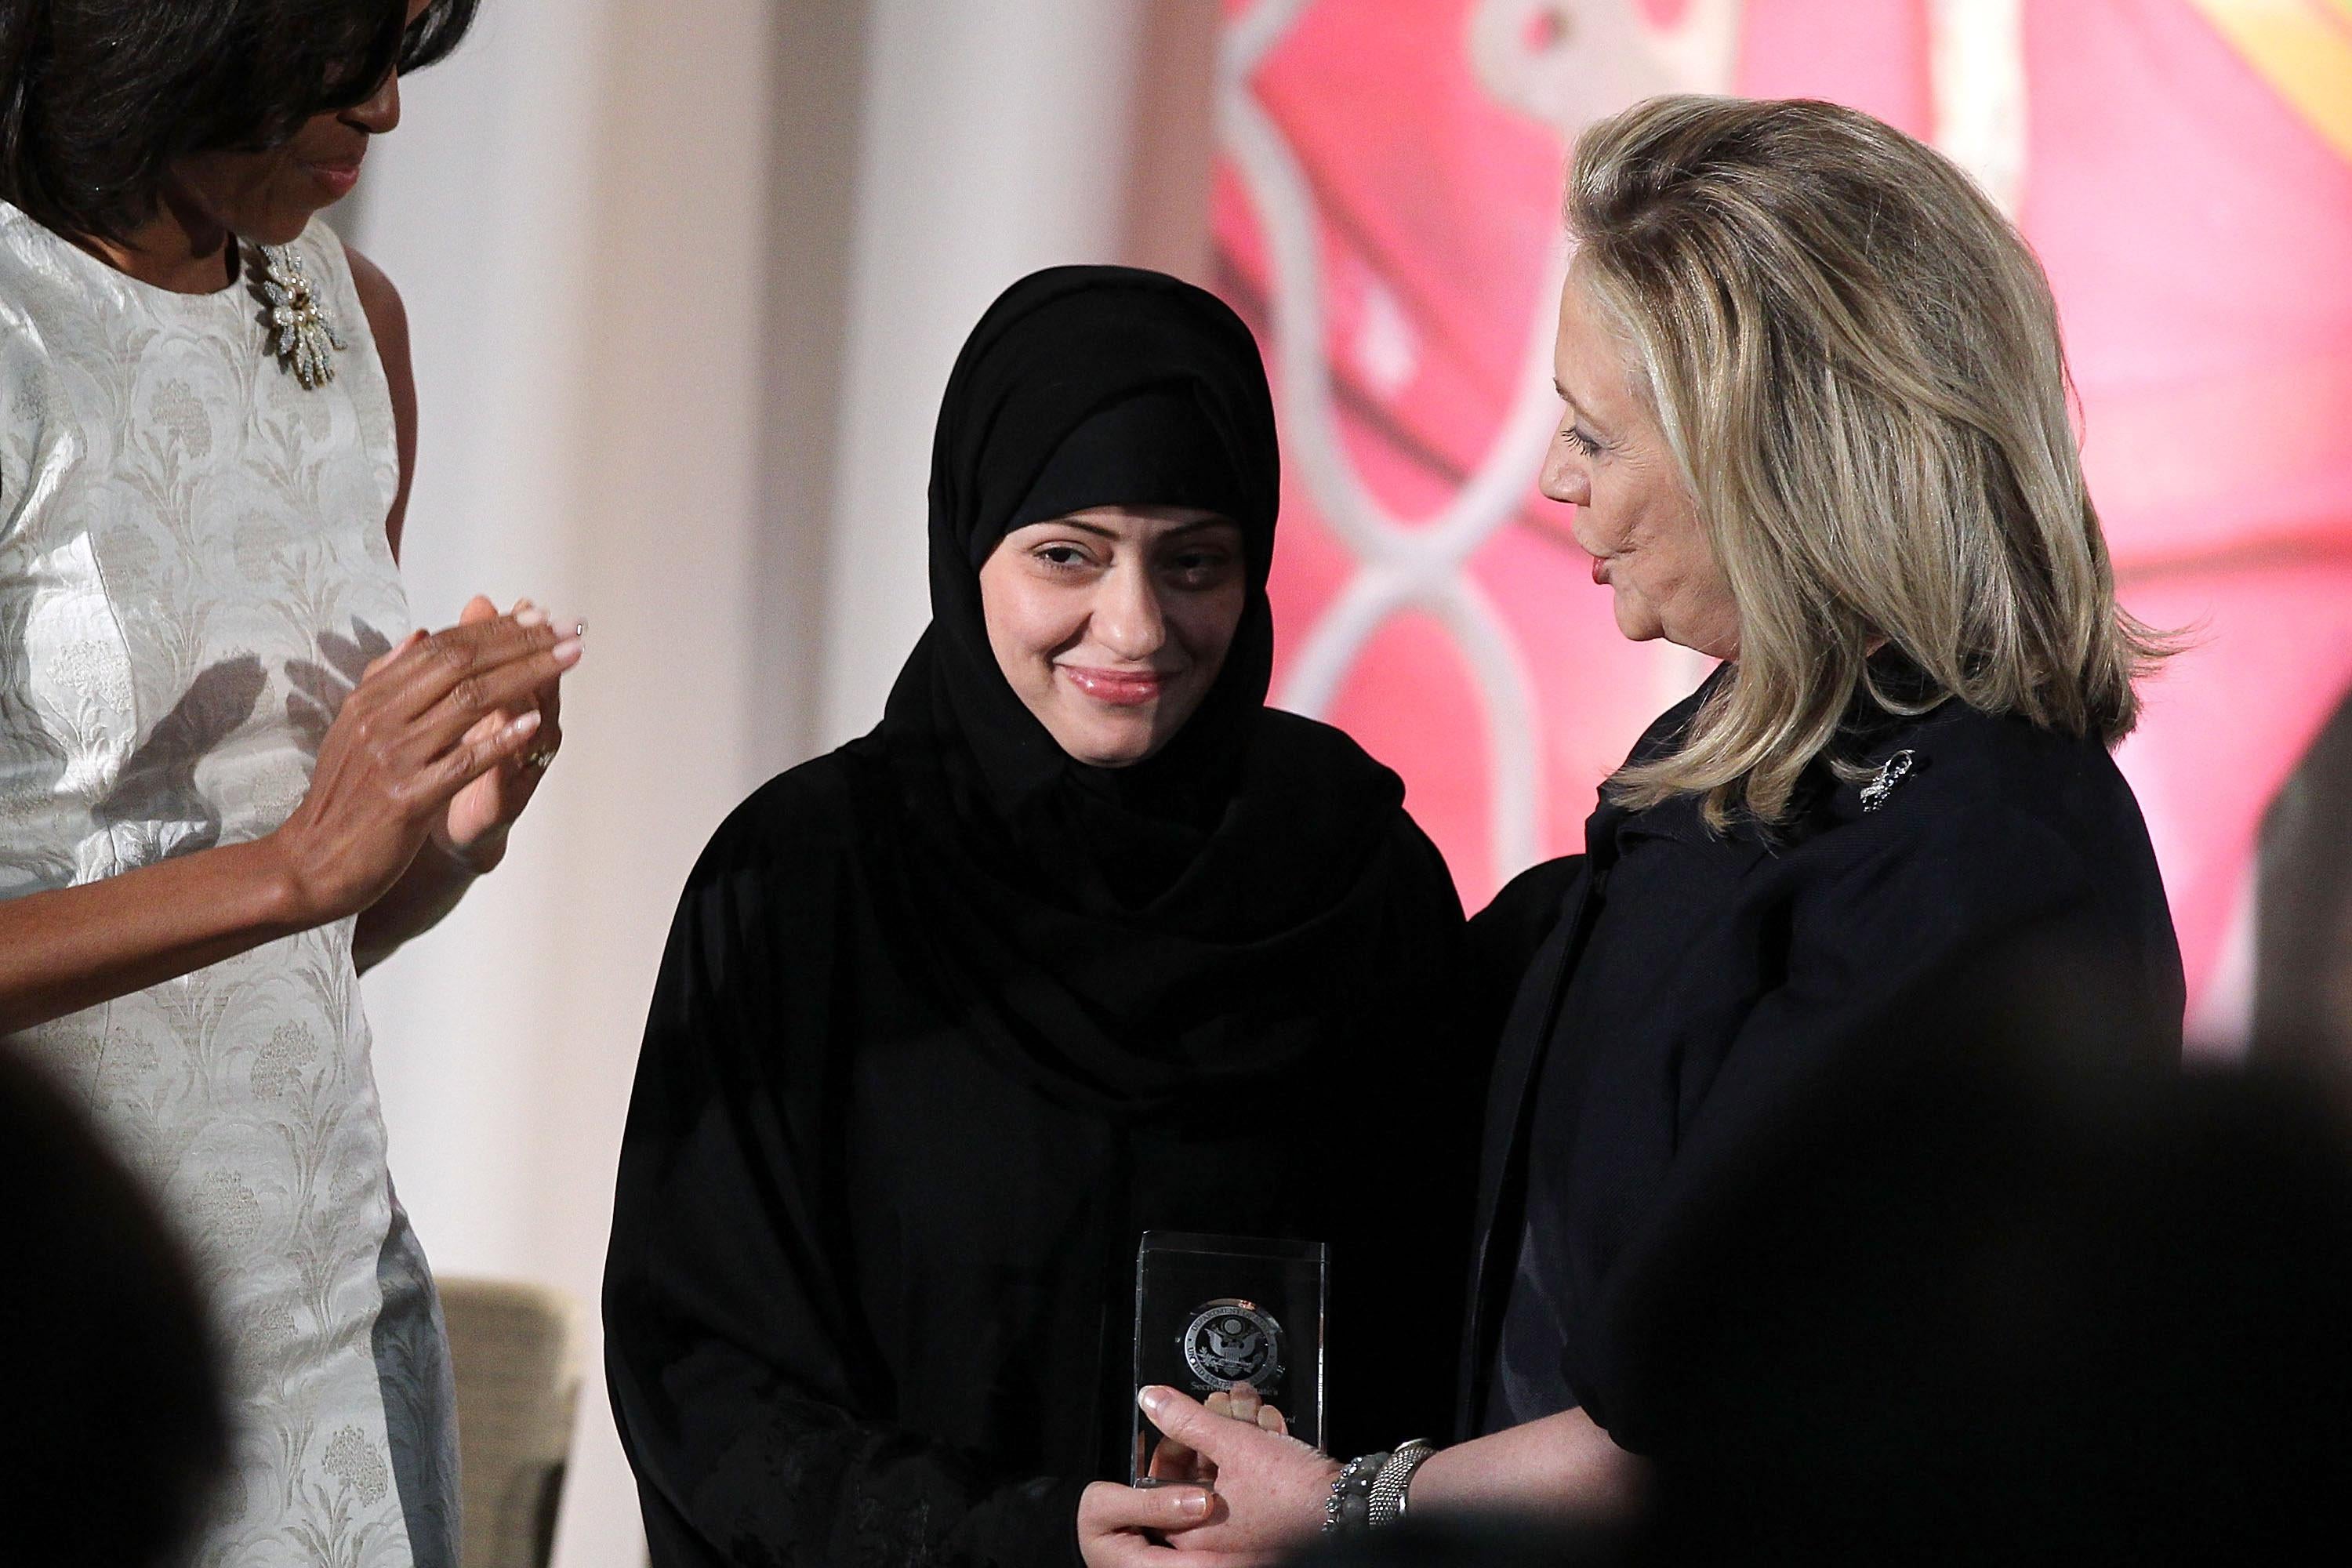 Political activist Samar Badawi is presented with an International Women of Courage Award by U.S. Secretary of State Hillary Clinton as first lady Michelle Obama looks on during a ceremony at the State Department March 8, 2012 in Washington, DC. 